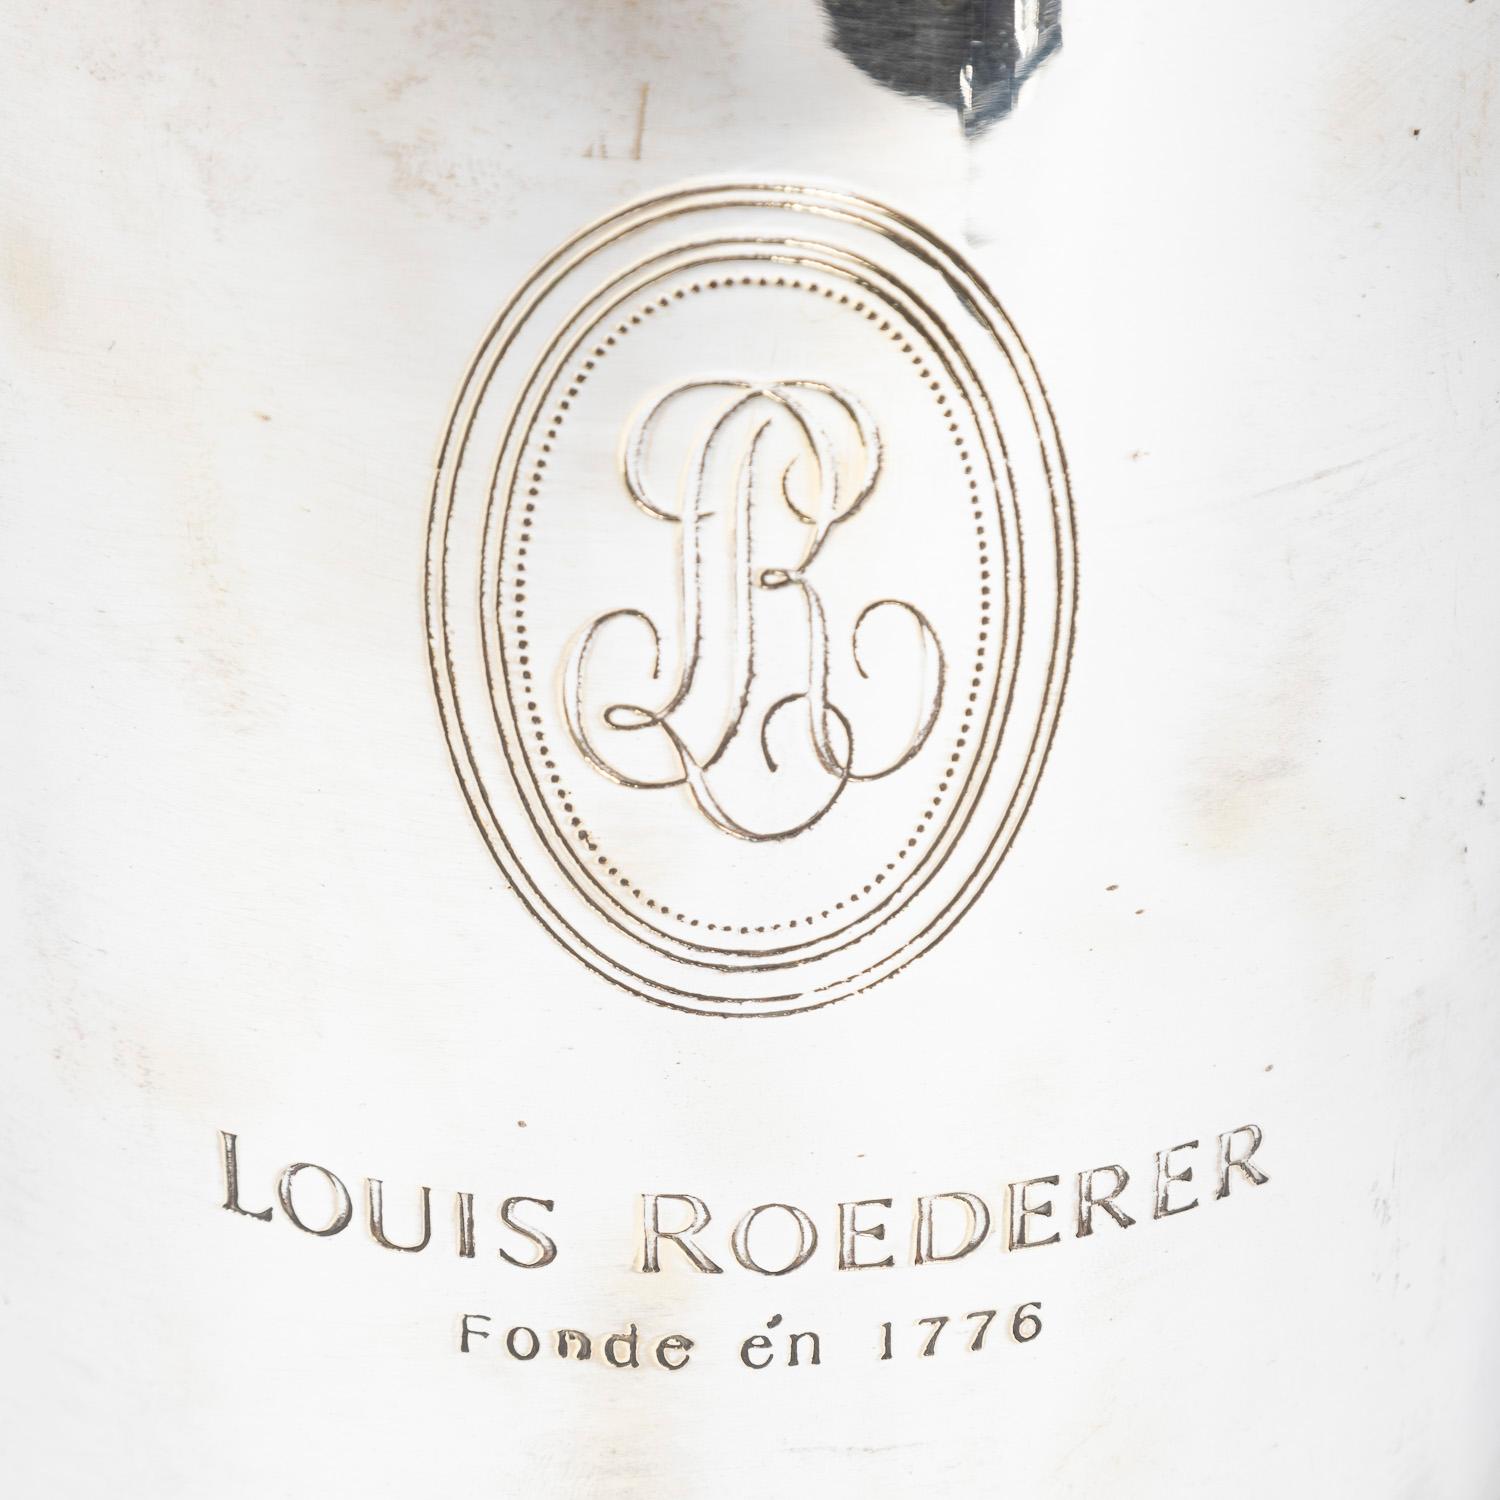 European Silver Plated Champagne Ice Bucket for Louis Roederer by James Deakin & Sons